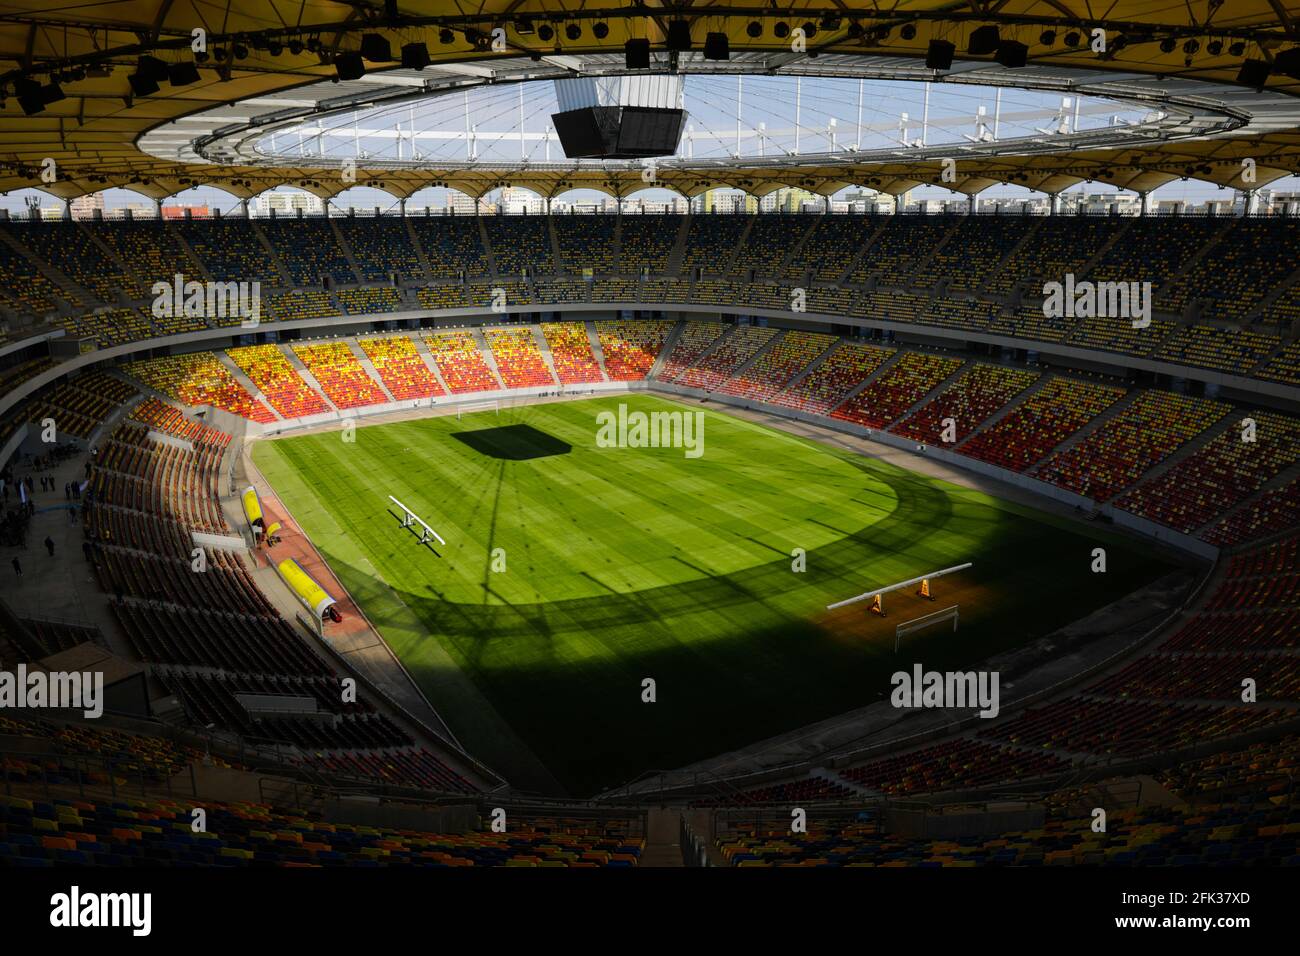 Bucharest, Romania - April 25, 2021: Overview of the National Arena Stadium in Bucharest on a sunny day. Stock Photo